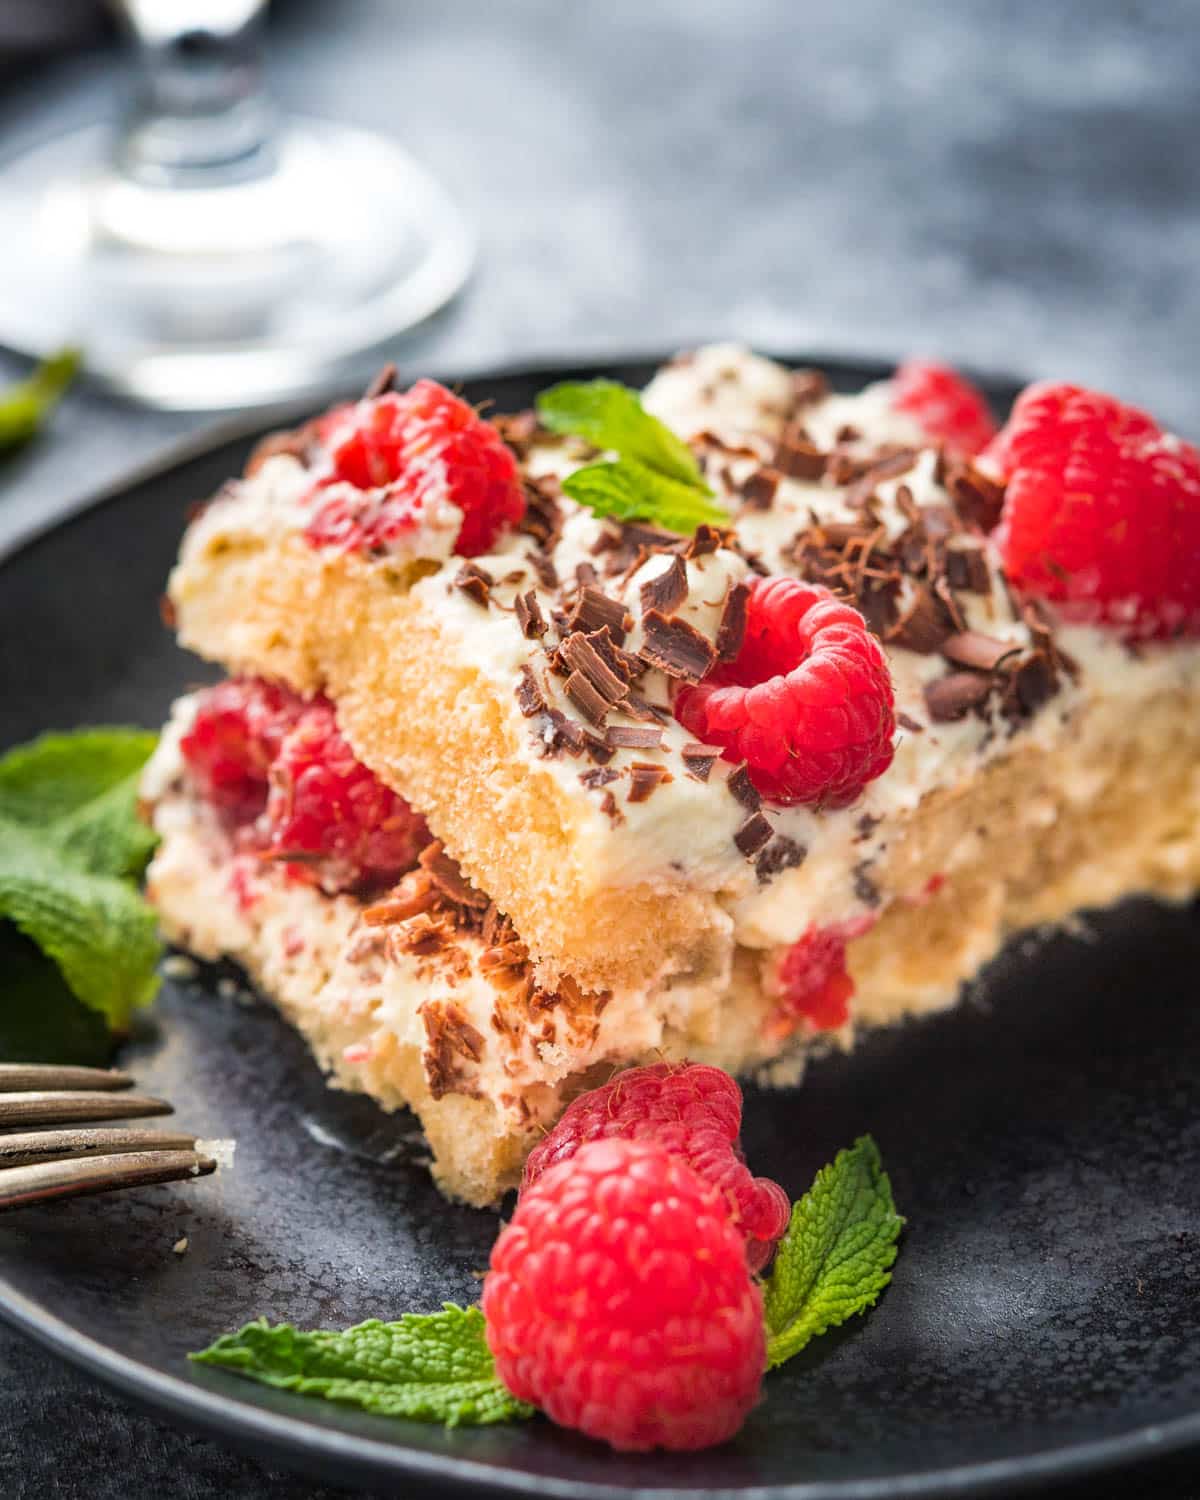 A dessert plate with raspberry tiramisu and extra berries and mint for garnish.